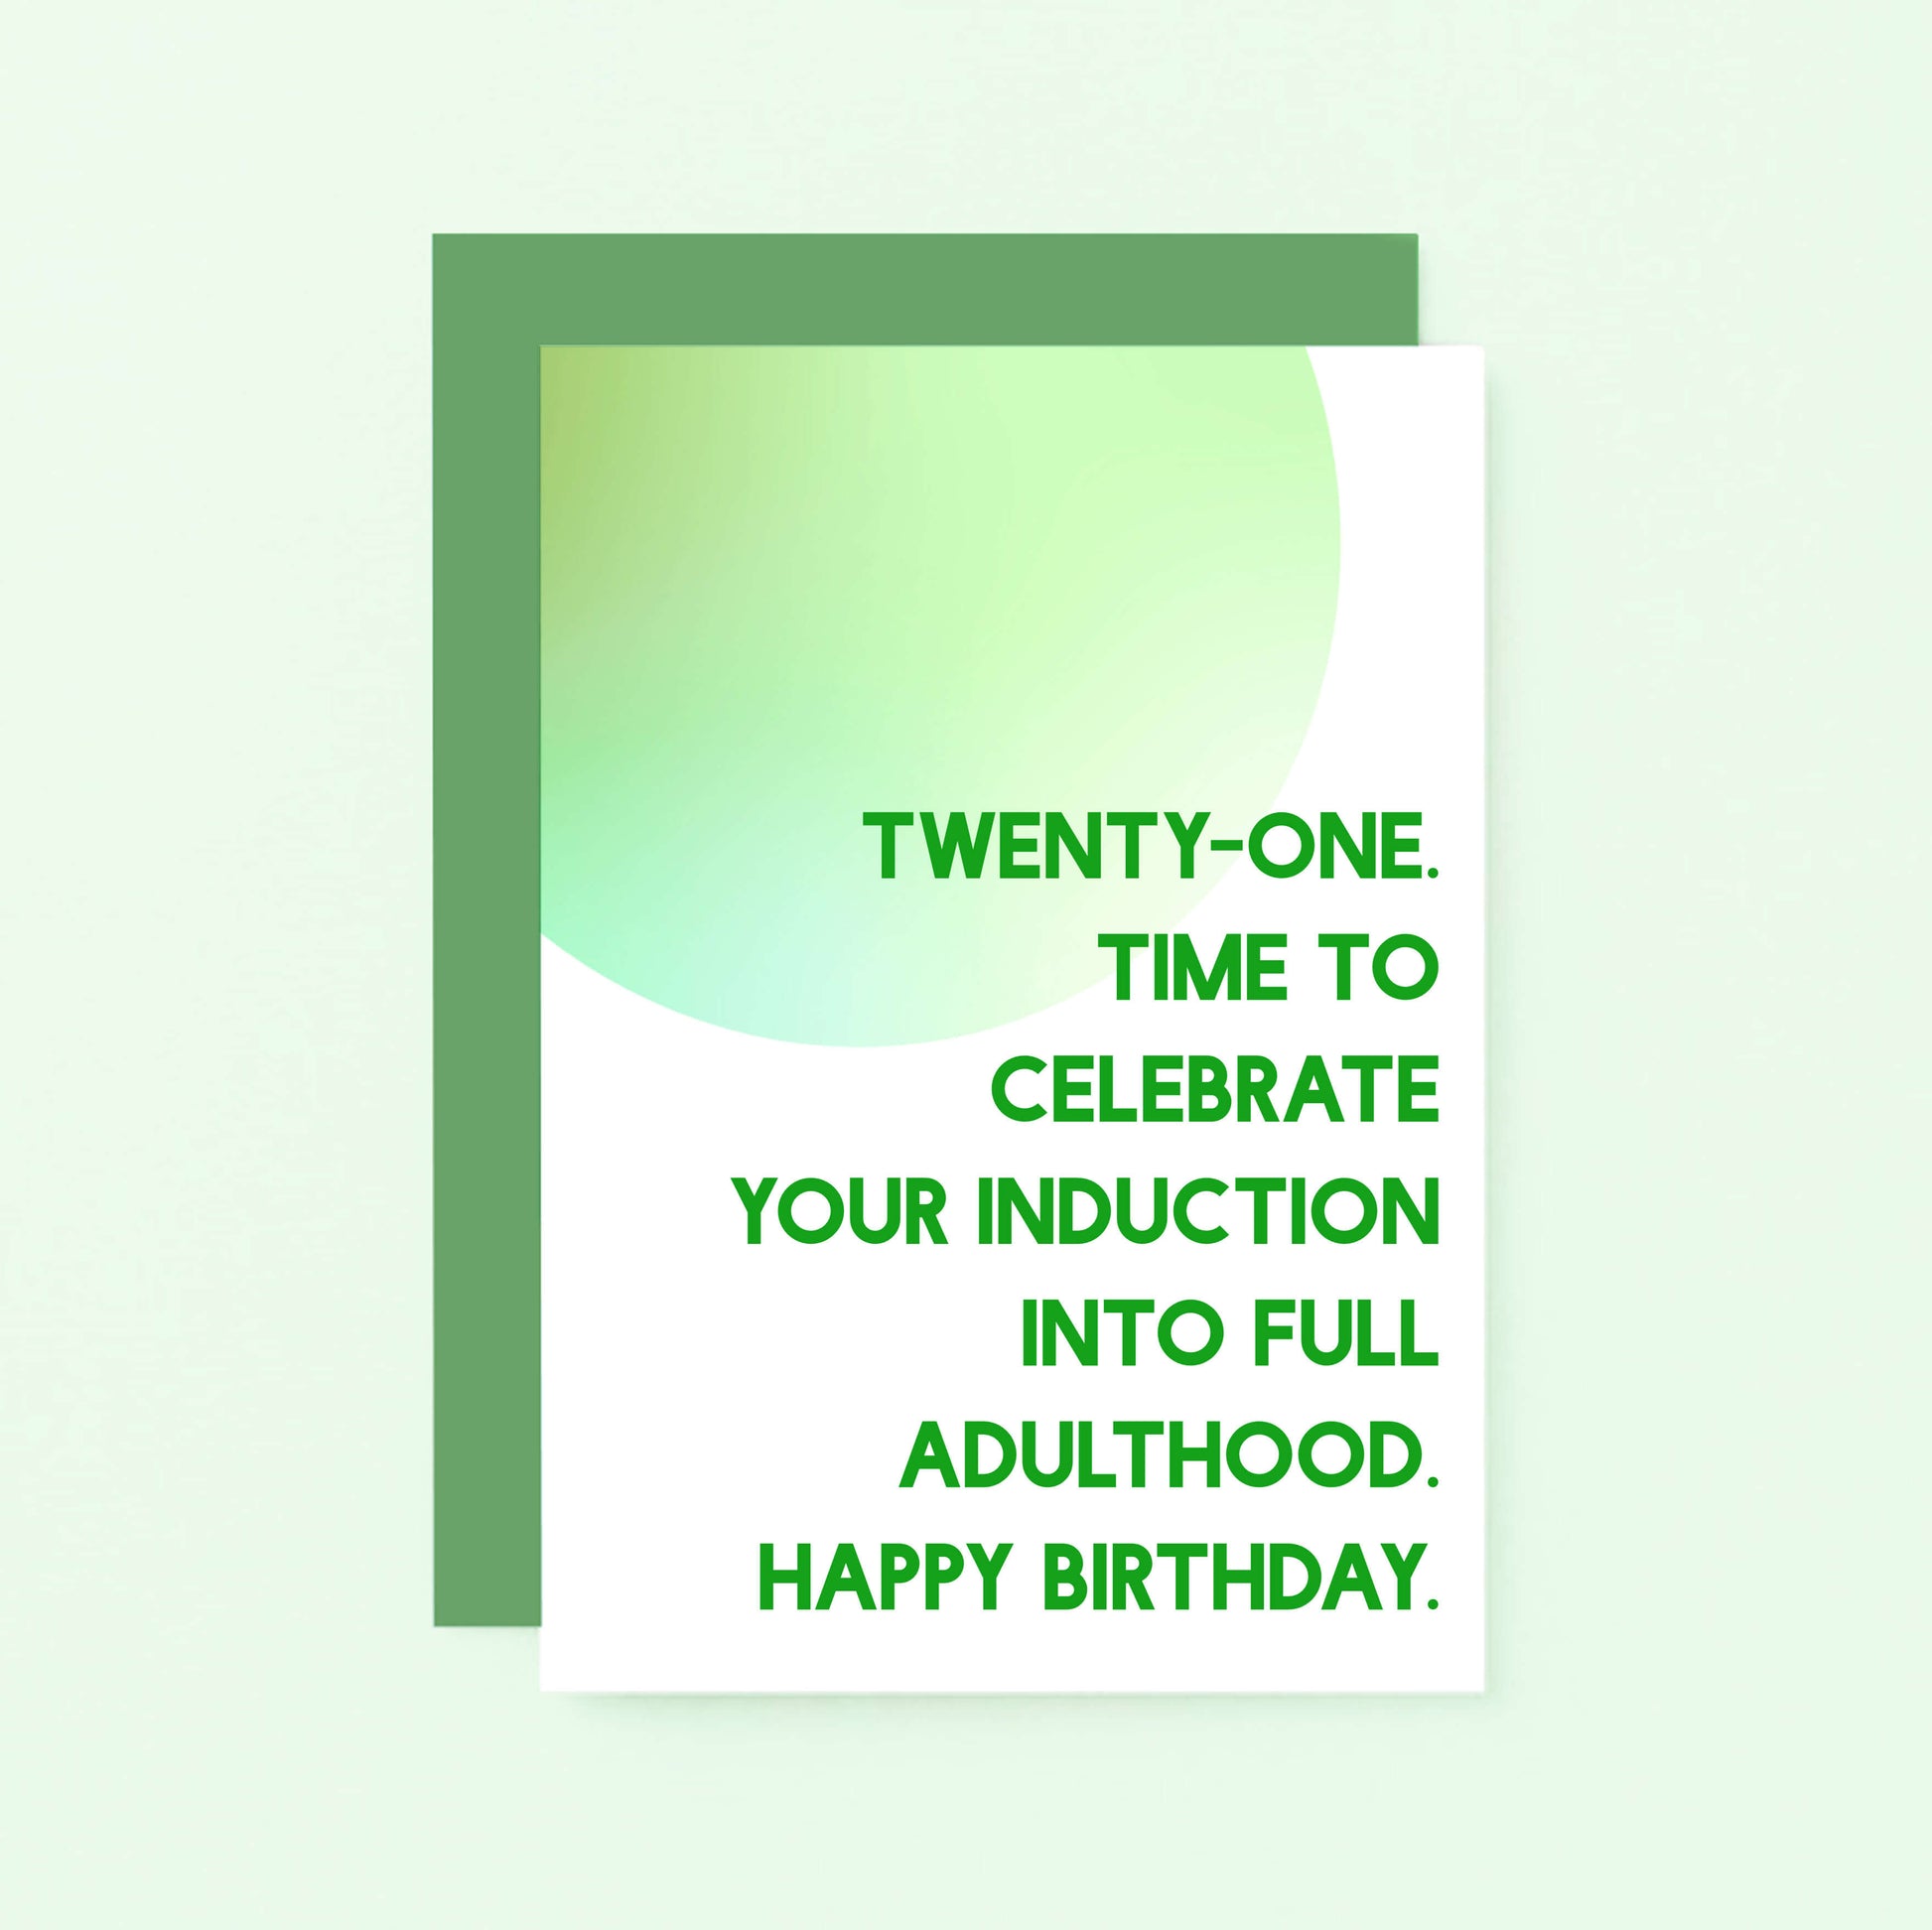 21st Birthday Card by SixElevenCreations. Reads Twenty-one. Time to celebrate your induction into full adulthood. Happy birthday. Product Code SE2053A6